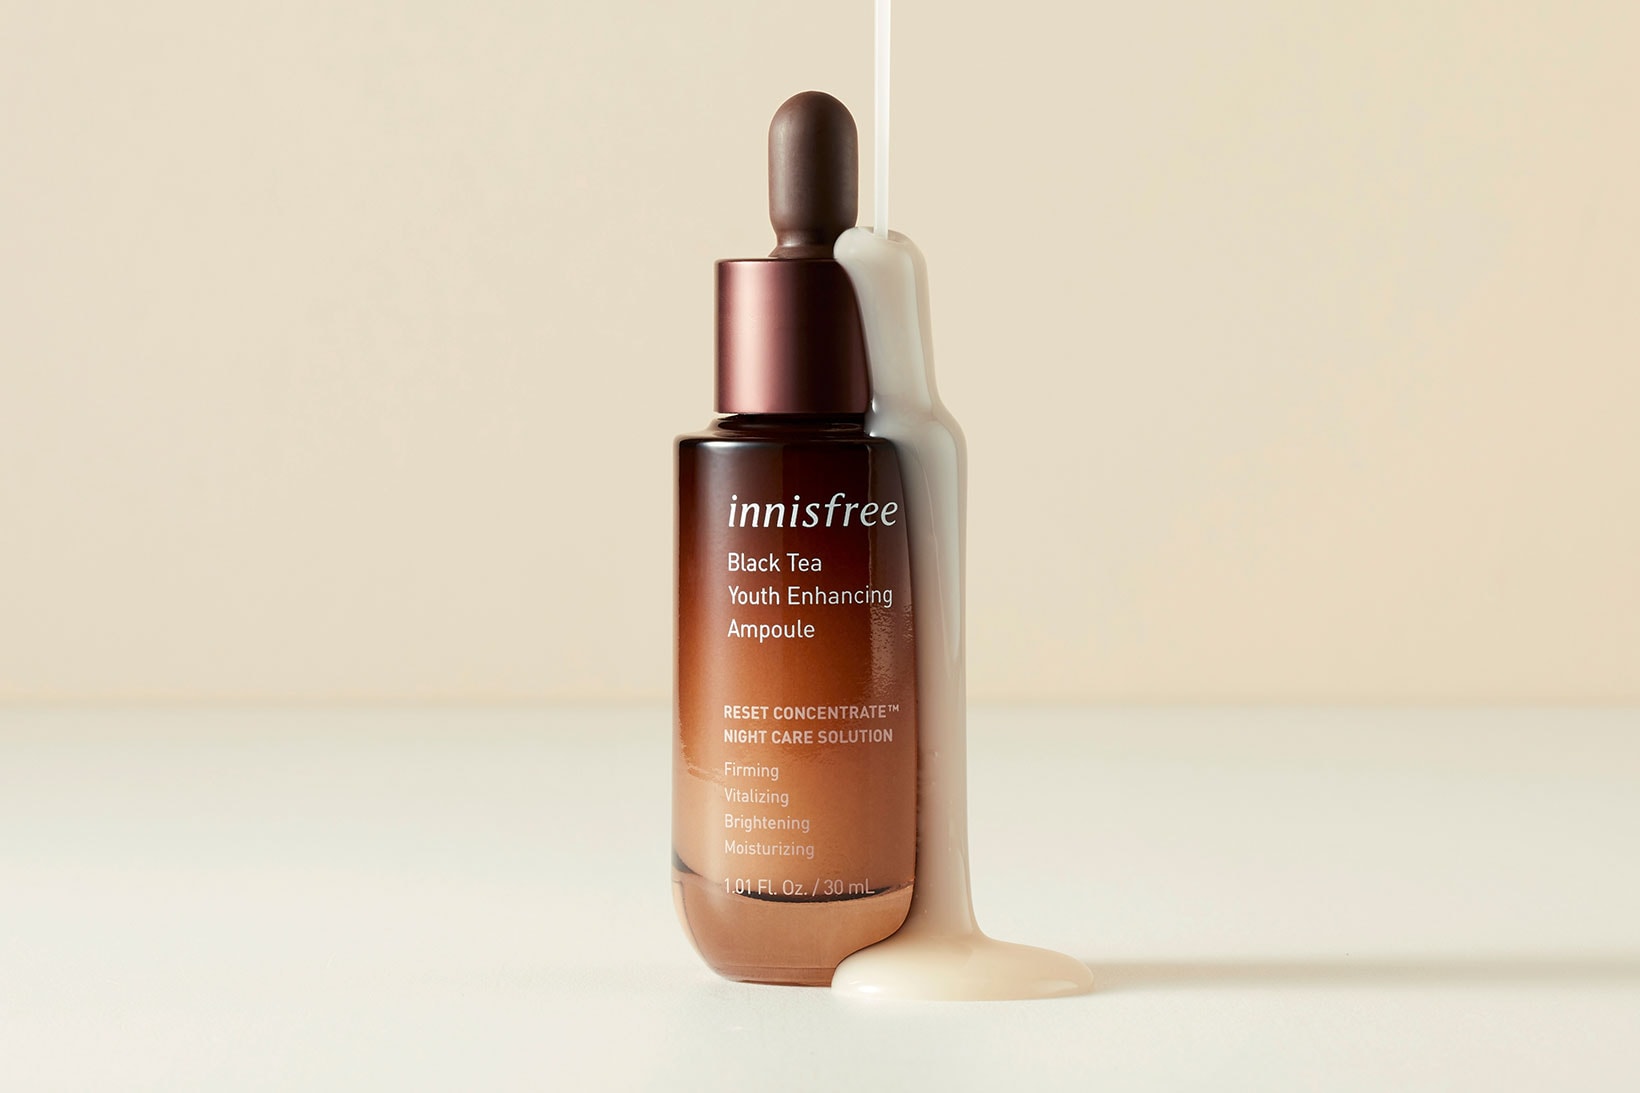 innisfree black tea youth enhancing line products collection k-beauty skincare ampoule